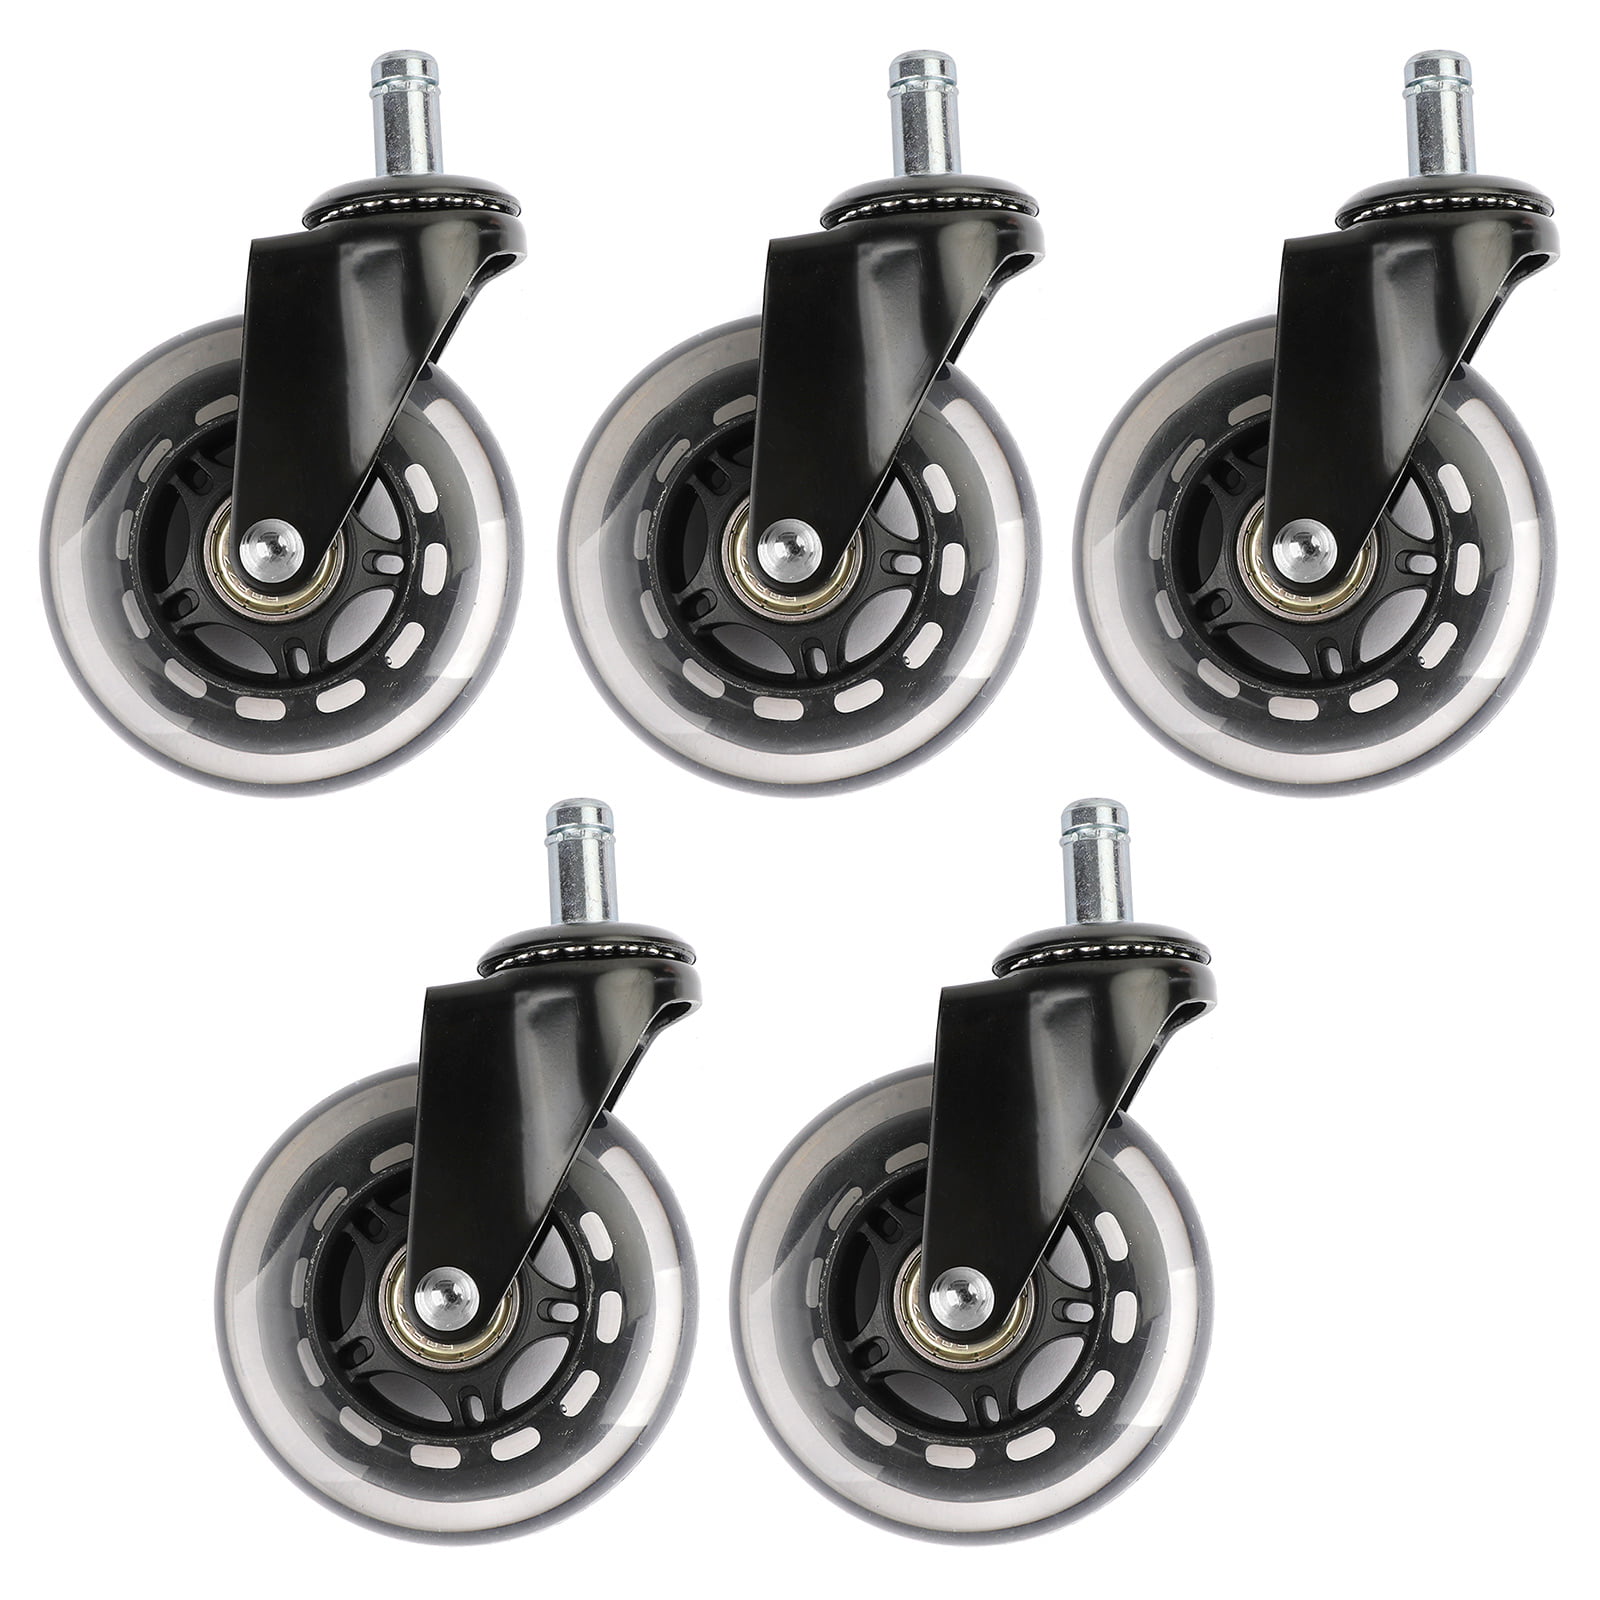 Set of 5 Office Chair Replacement Casters Wheels Rubber Heavy Duty Swivel 3 inch 